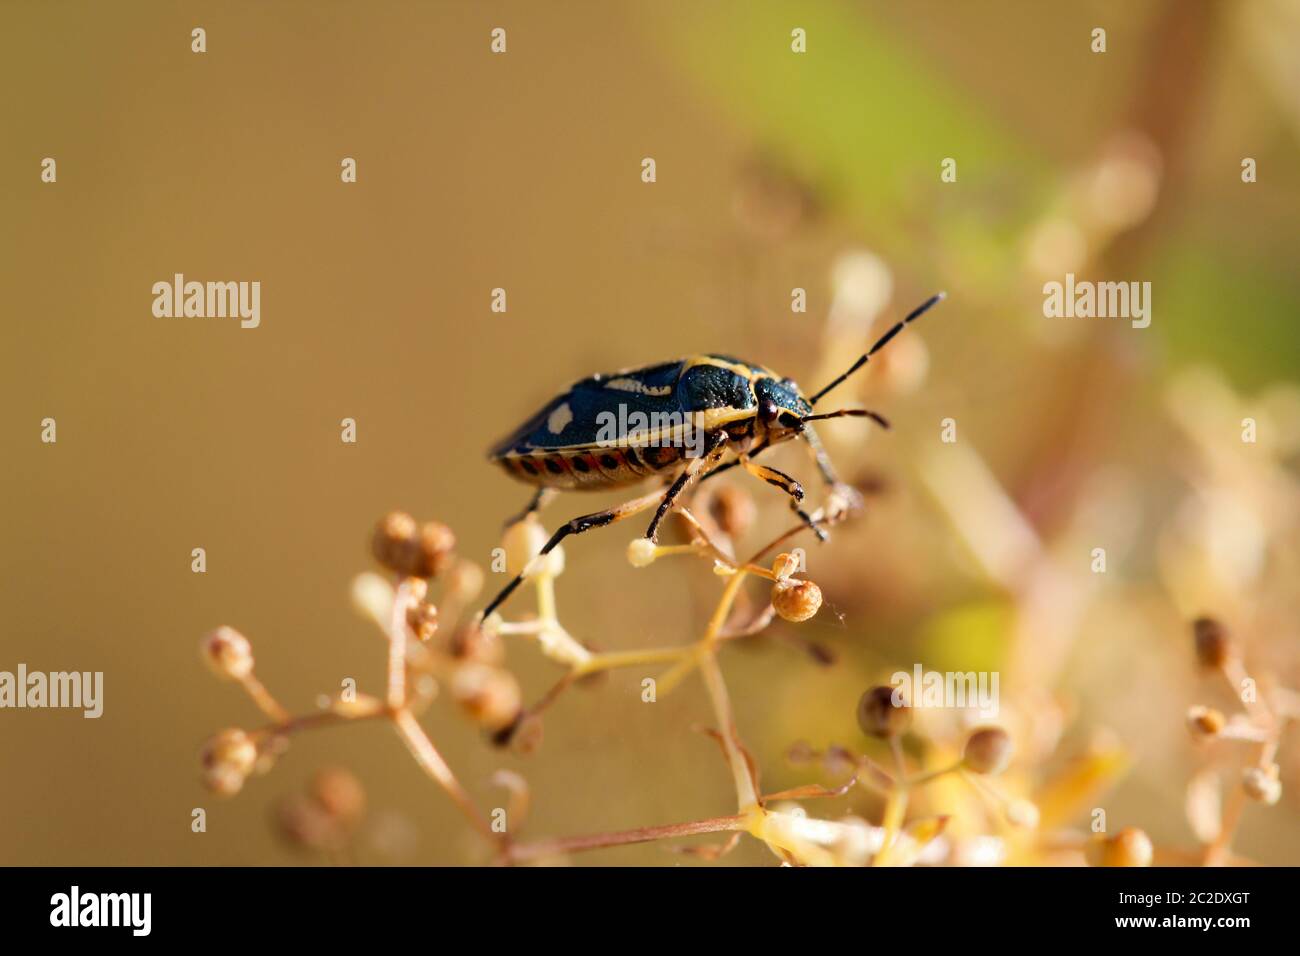 A bug or beetle on a plant Stock Photo